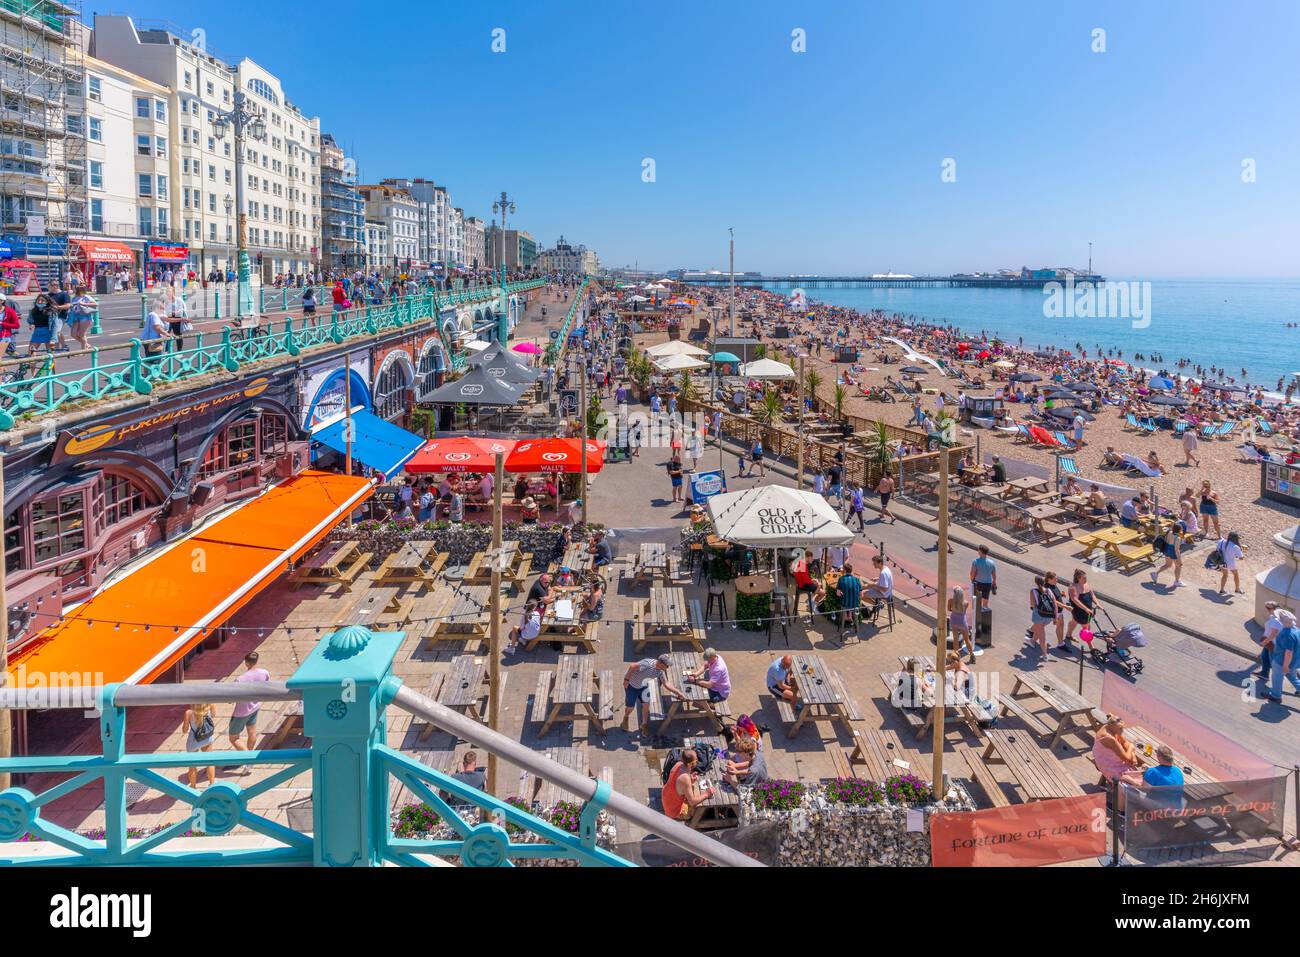 View of beach, seafront cafe and Brighton Palace Pier on a sunny day, Brighton, East Sussex, England, United Kingdom, Europe Stock Photo